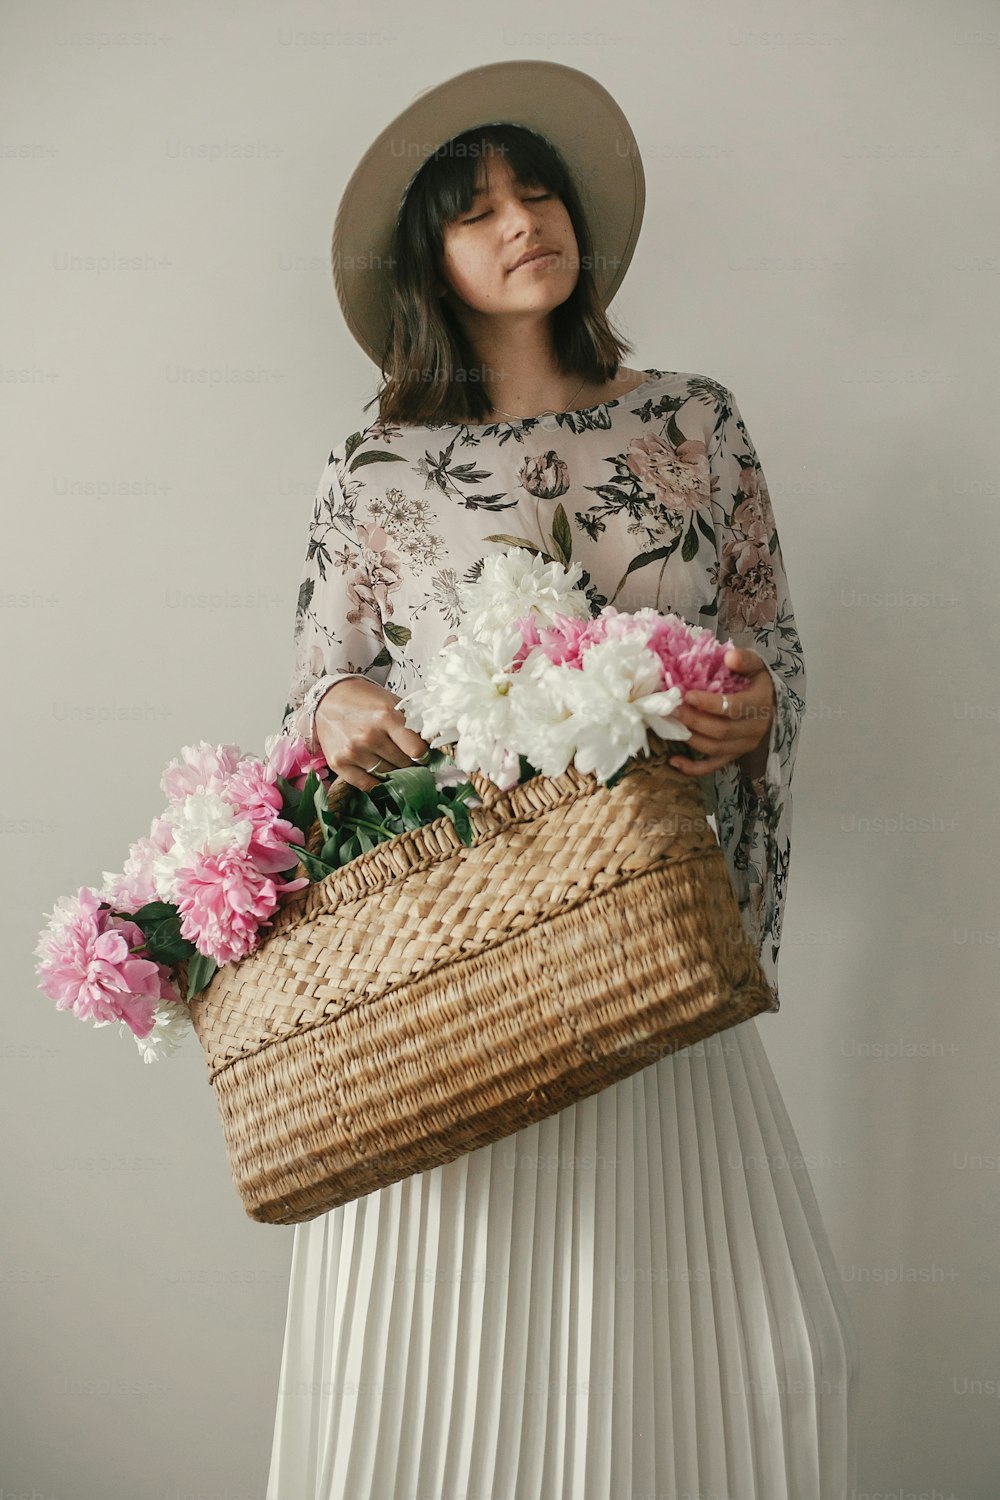 Boho girl in hat holding pink and white peonies in rustic basket. Stylish hipster woman in bohemian floral dress posing with flowers. International Womens Day. Countryside living